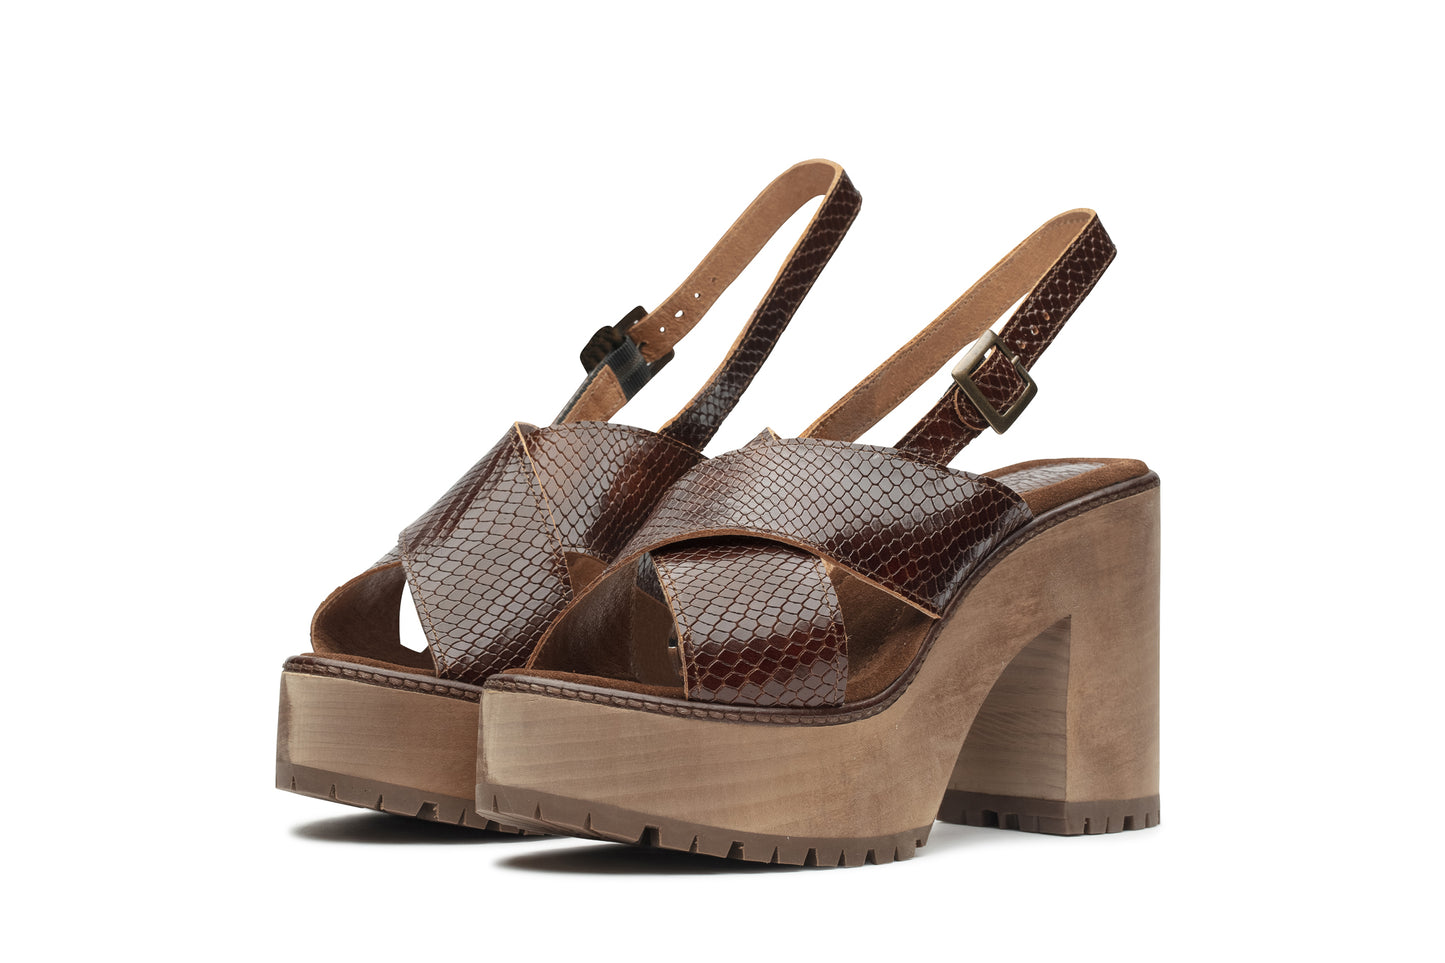 Strap sandal with wooden heel